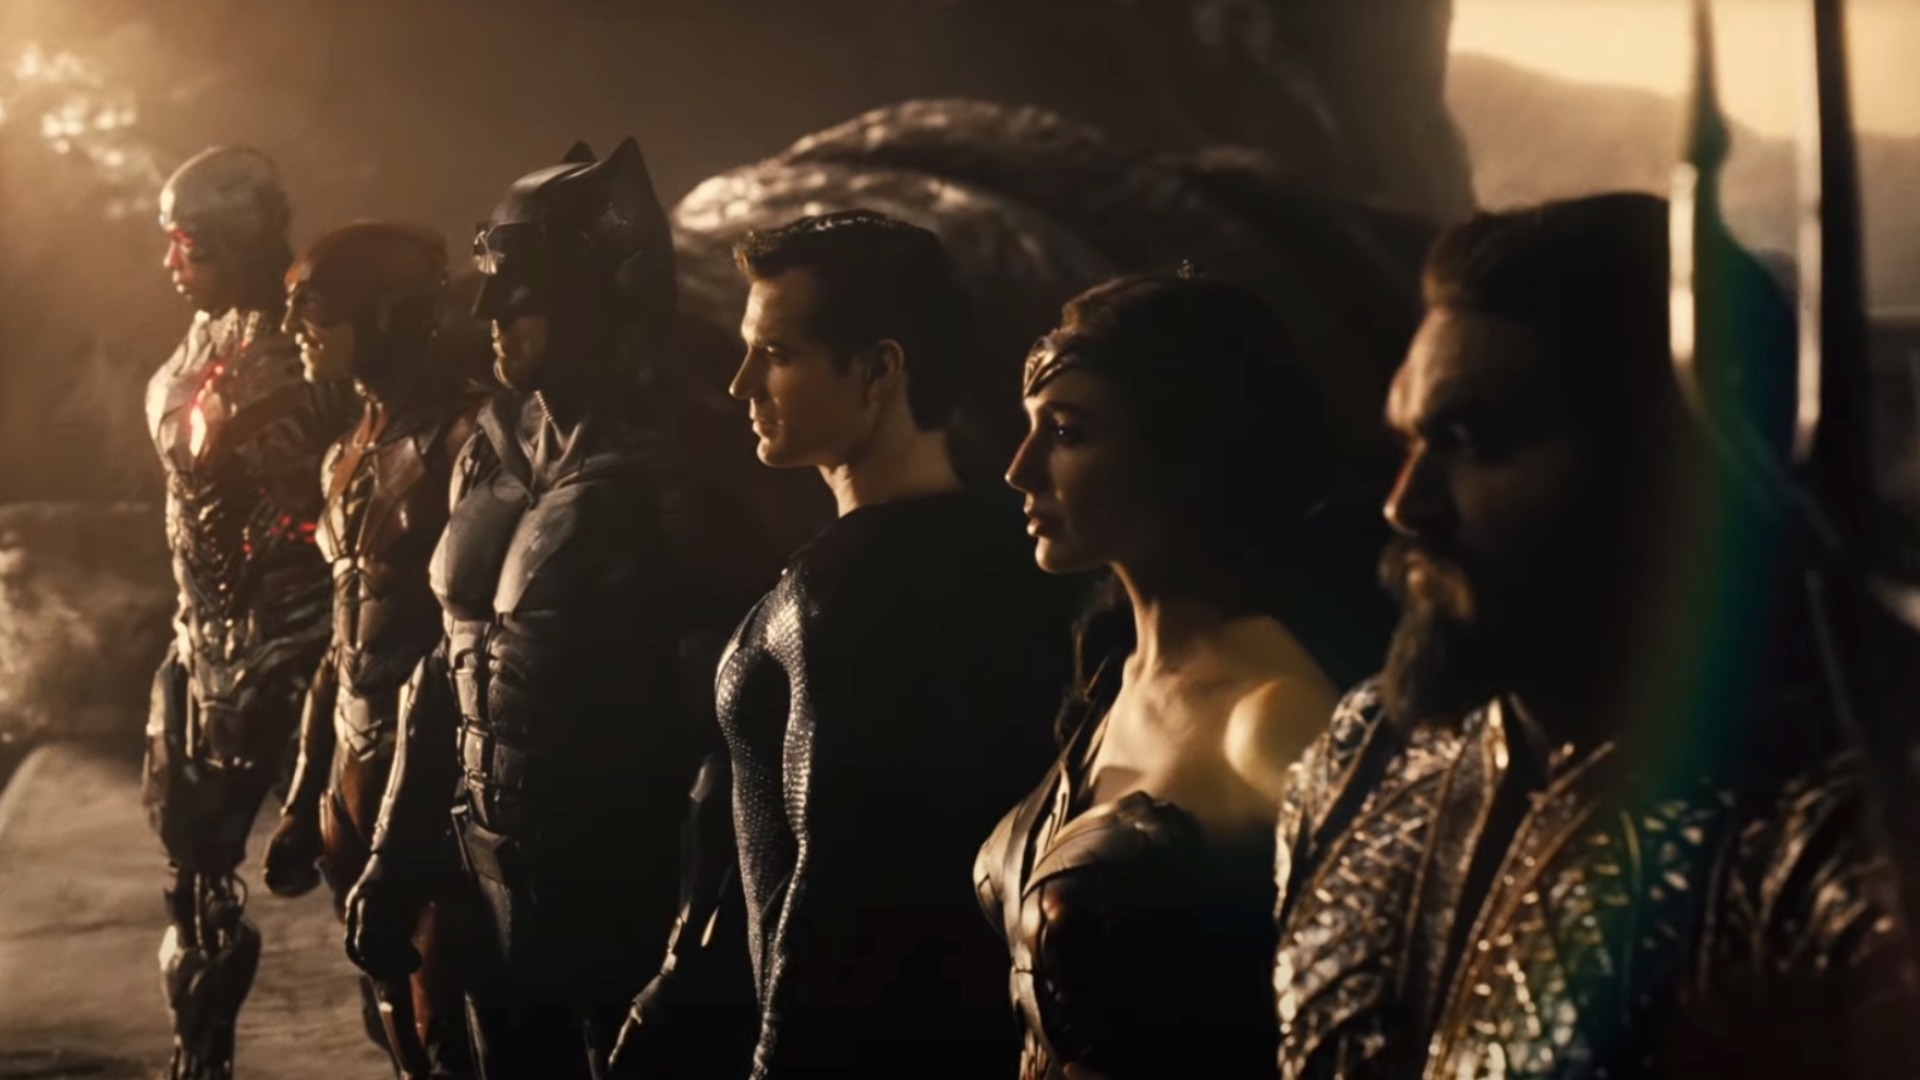 Zack Snyder's Justice League Review